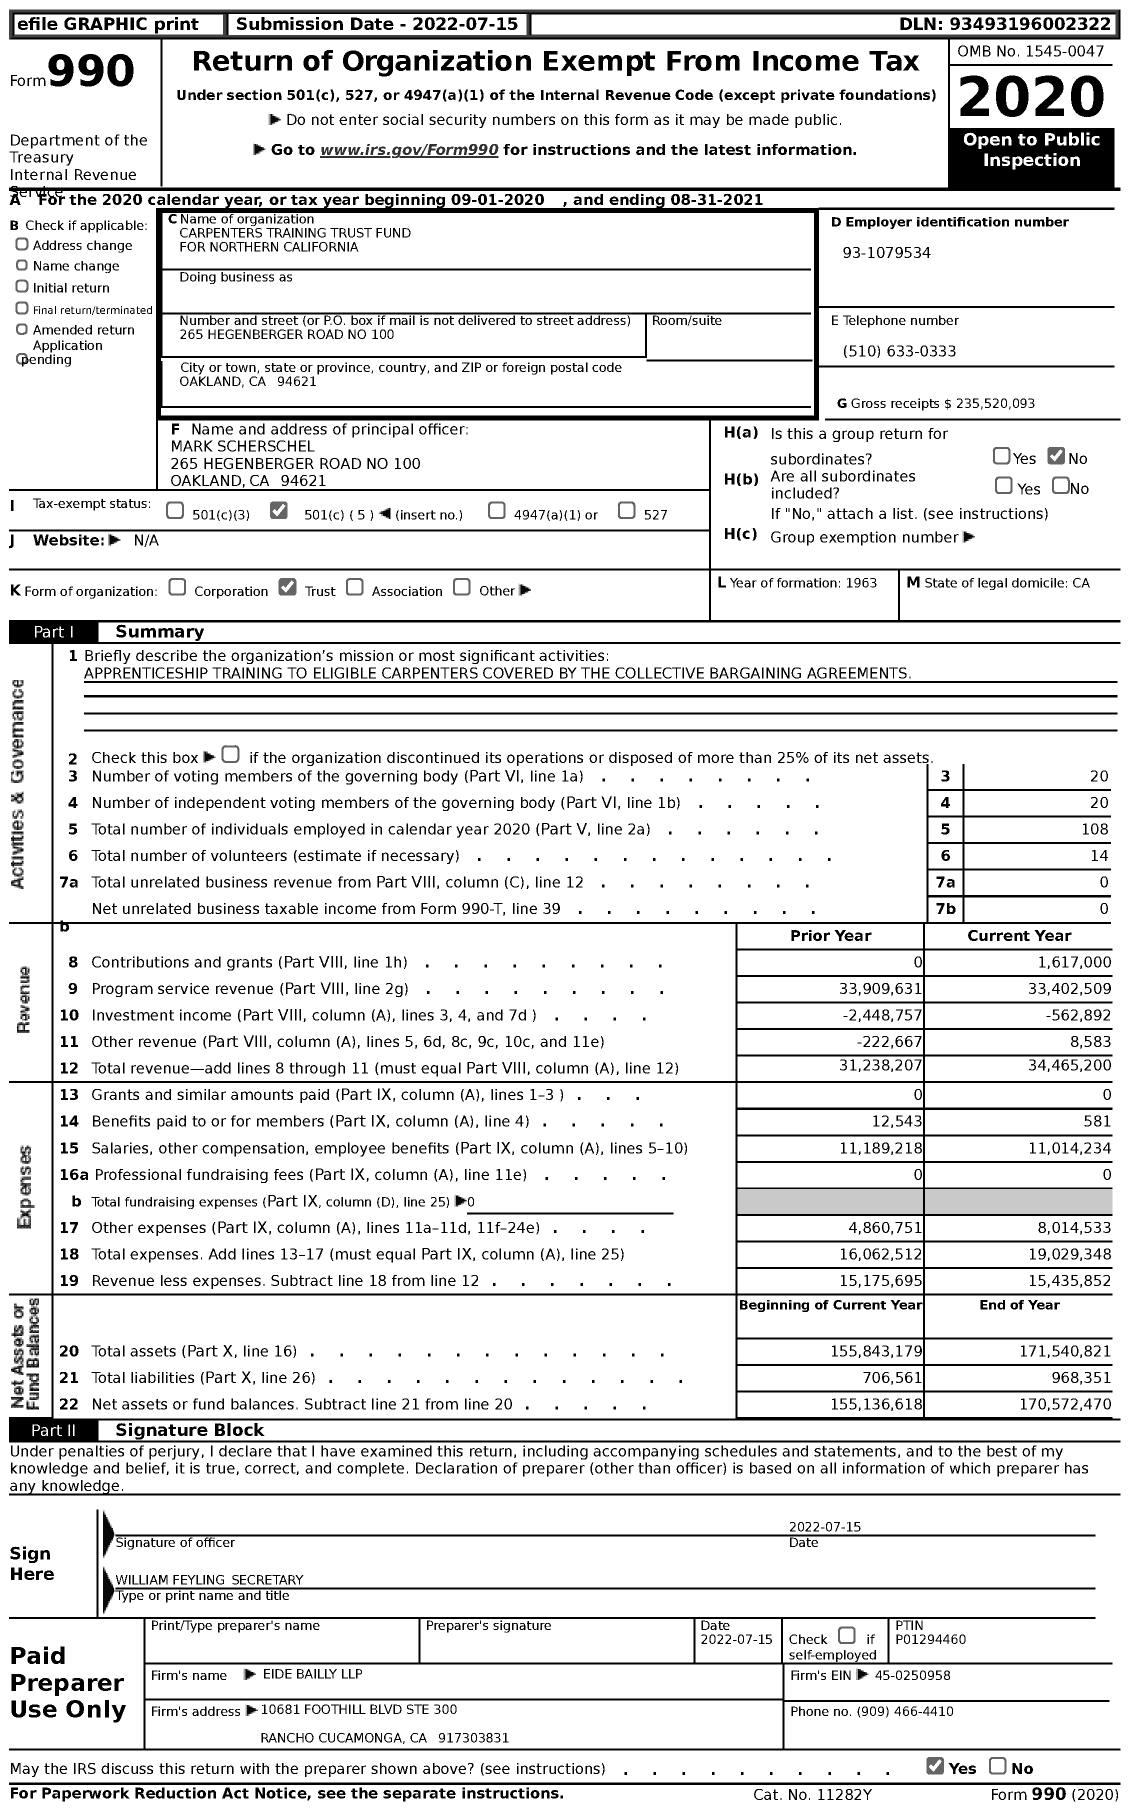 Image of first page of 2020 Form 990 for Carpenters Training Trust Fund for Northern California